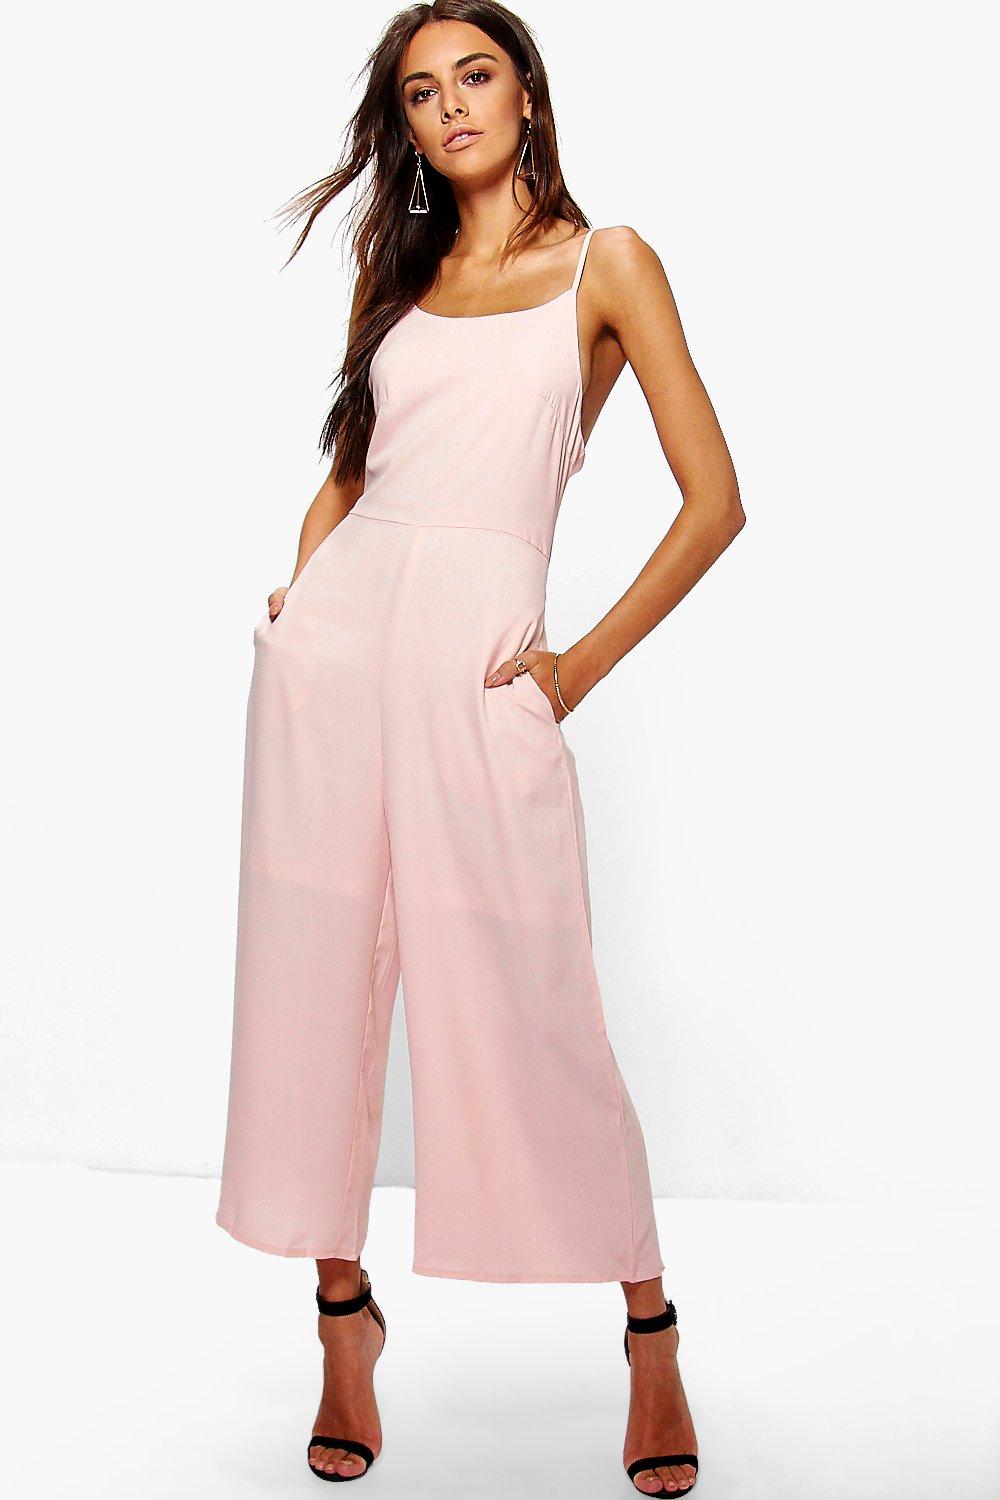 Nia Low Back Woven Culotte Jumpsuit | Boohoo